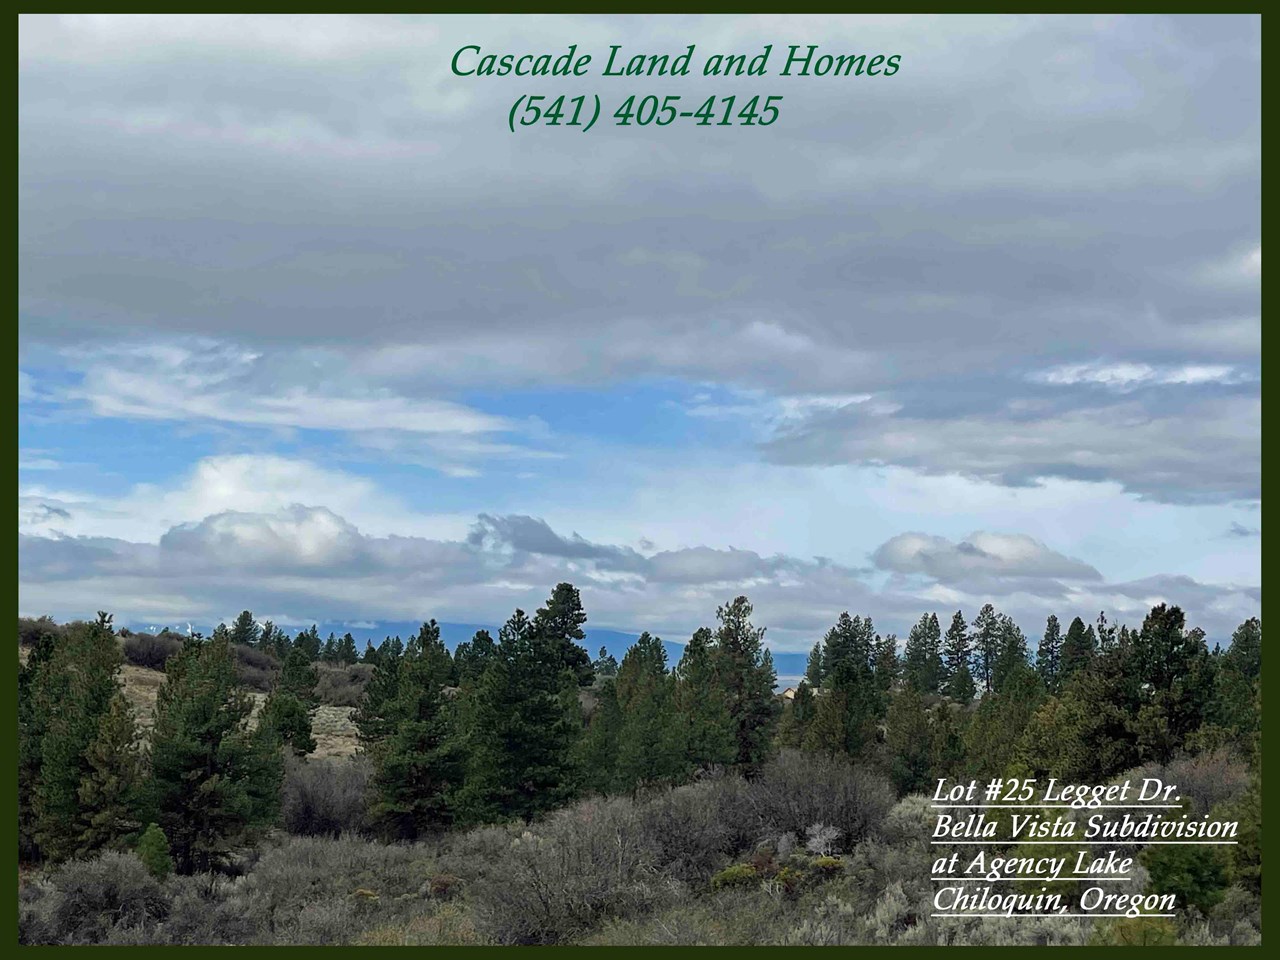 the property slopes gently upward allowing for some amazing views of the surrounding foothills, snowcapped peaks of the cascade mountains, and from the top of the property, there are lake views!